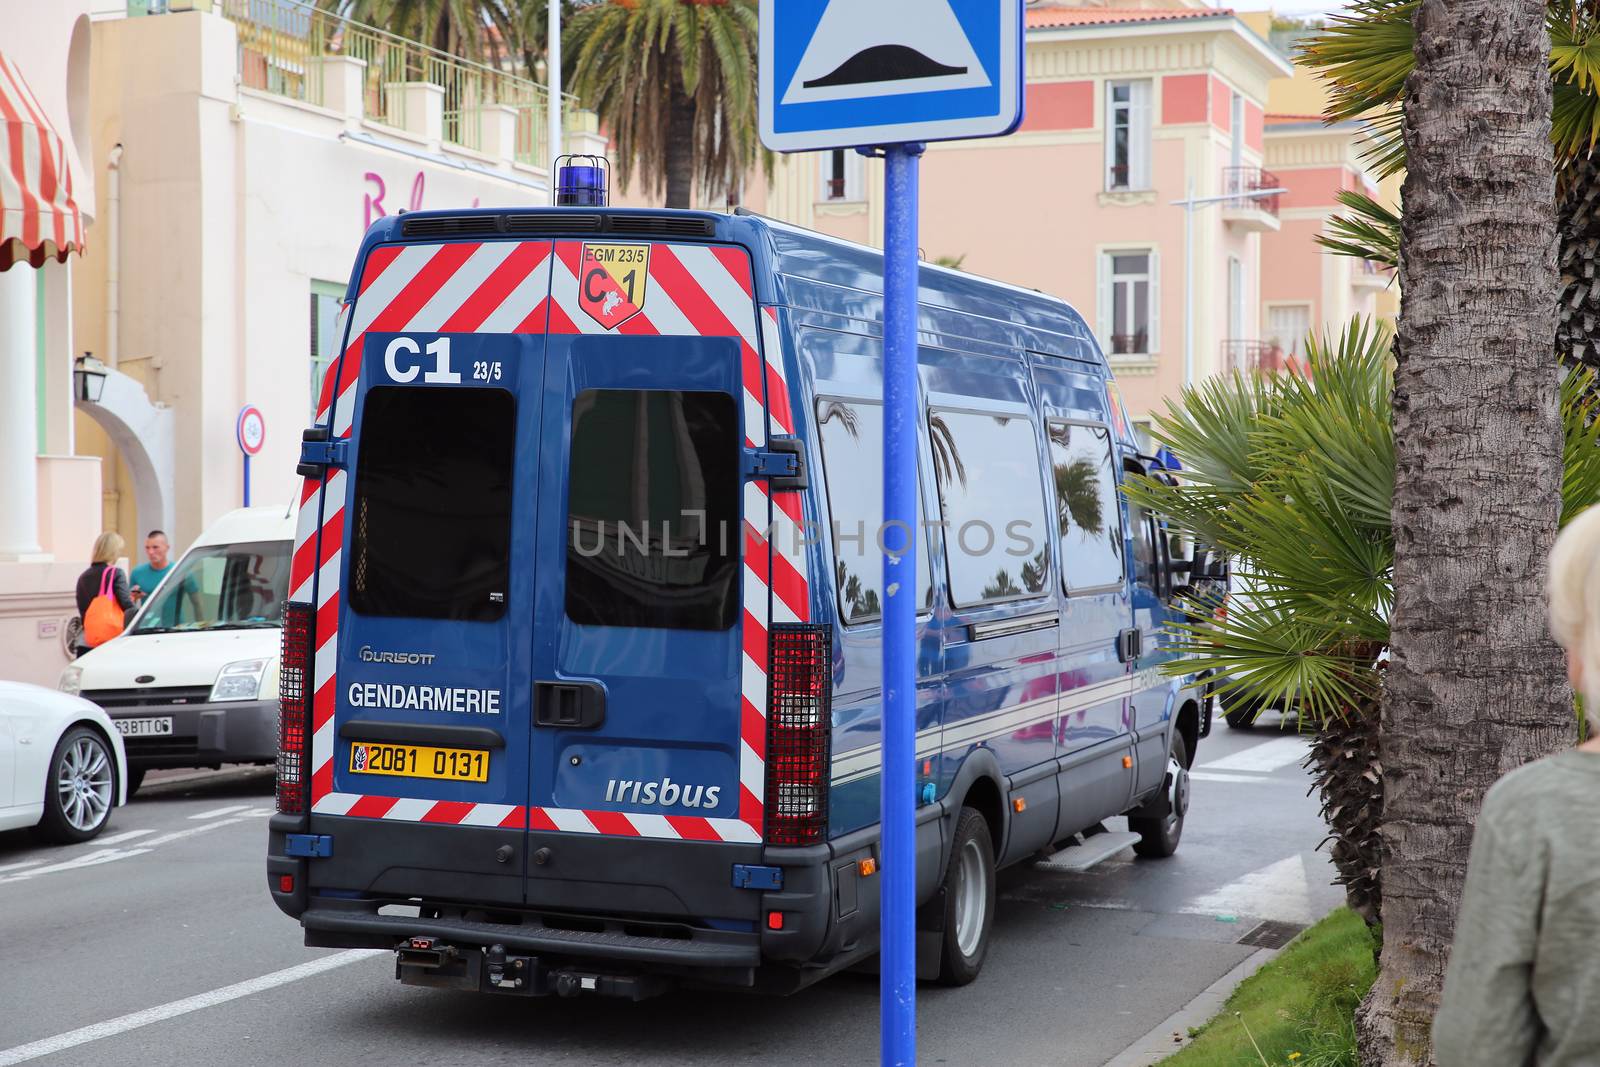 Menton, France - May 14, 2016: Police (Gendarmerie) Van Minibus Irisbus Durisotti at the City Street in Menton, French Riviera